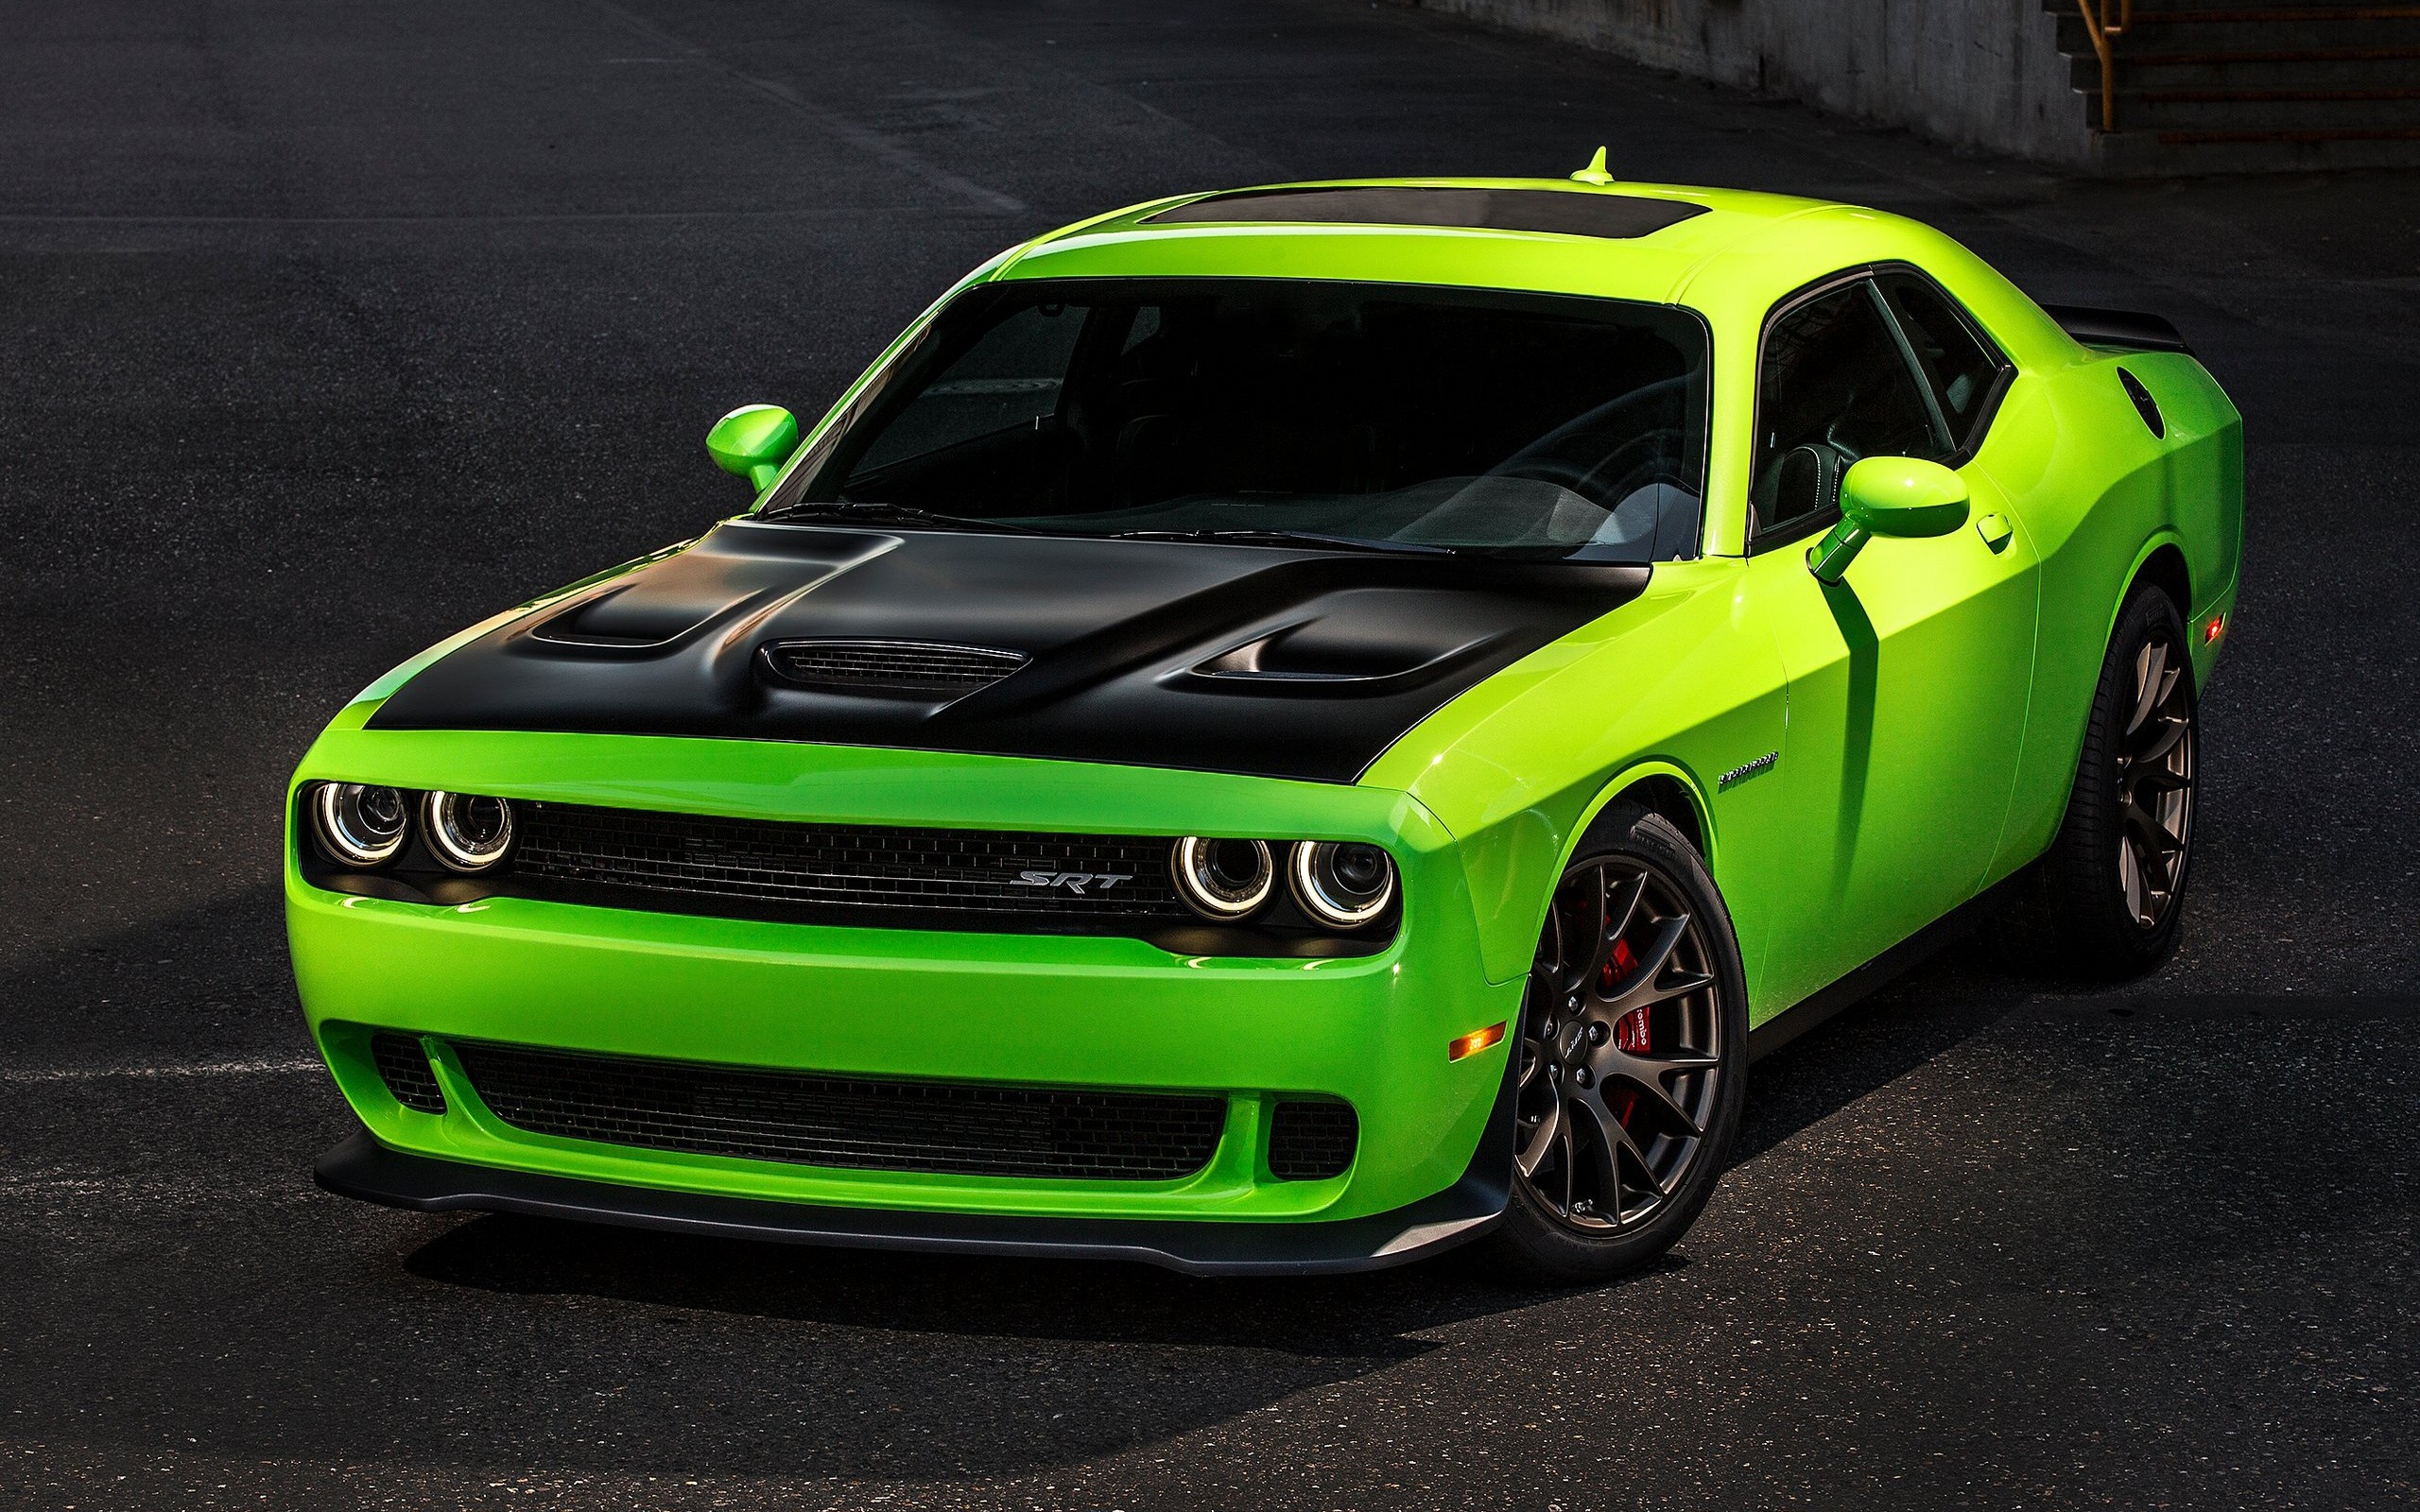 General 2560x1600 car vehicle green cars Dodge Dodge Challenger muscle cars American cars Stellantis